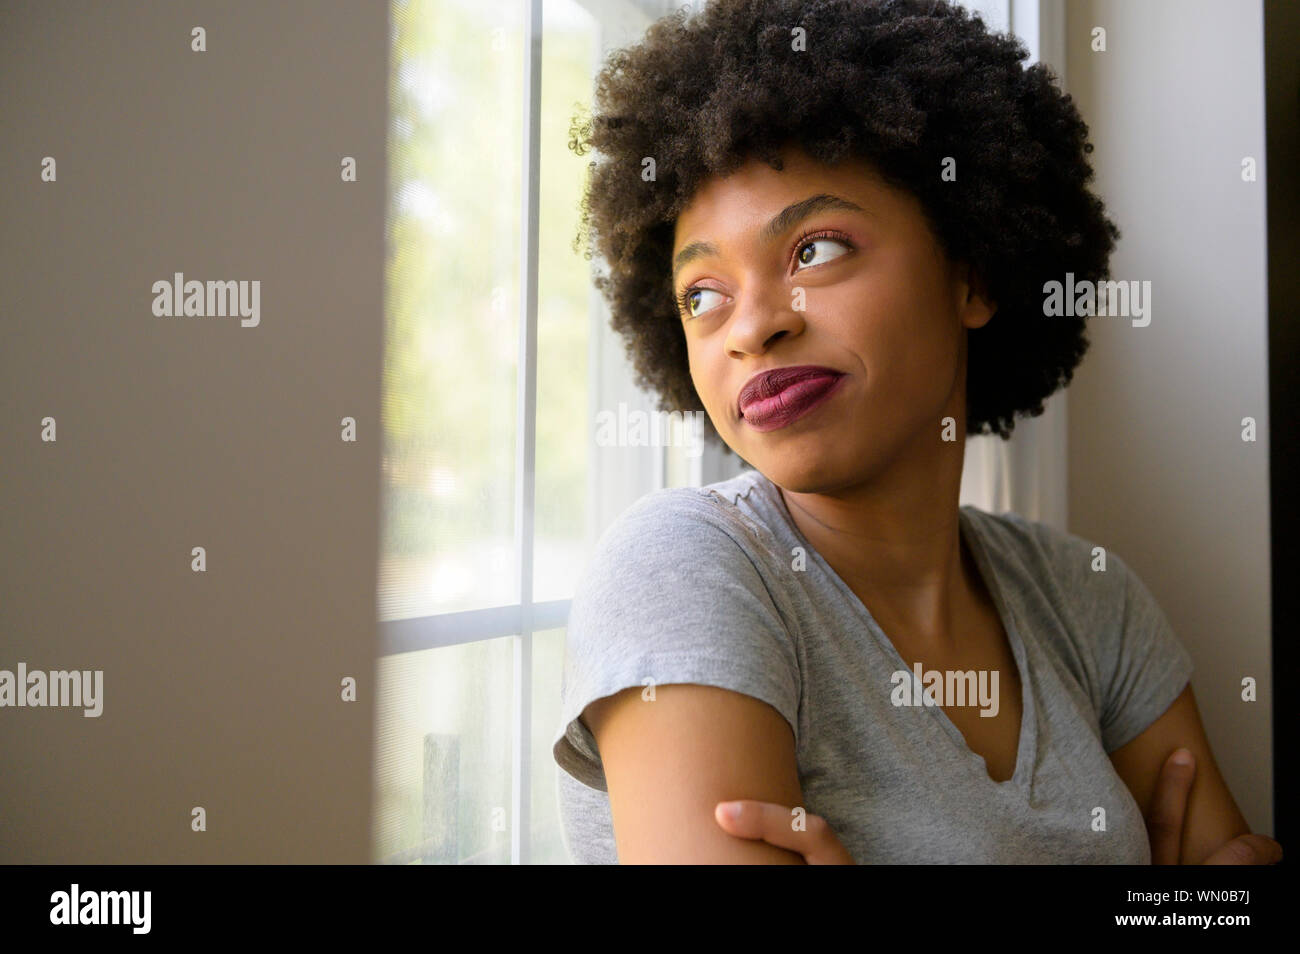 Young woman wearing lipstick by window Stock Photo